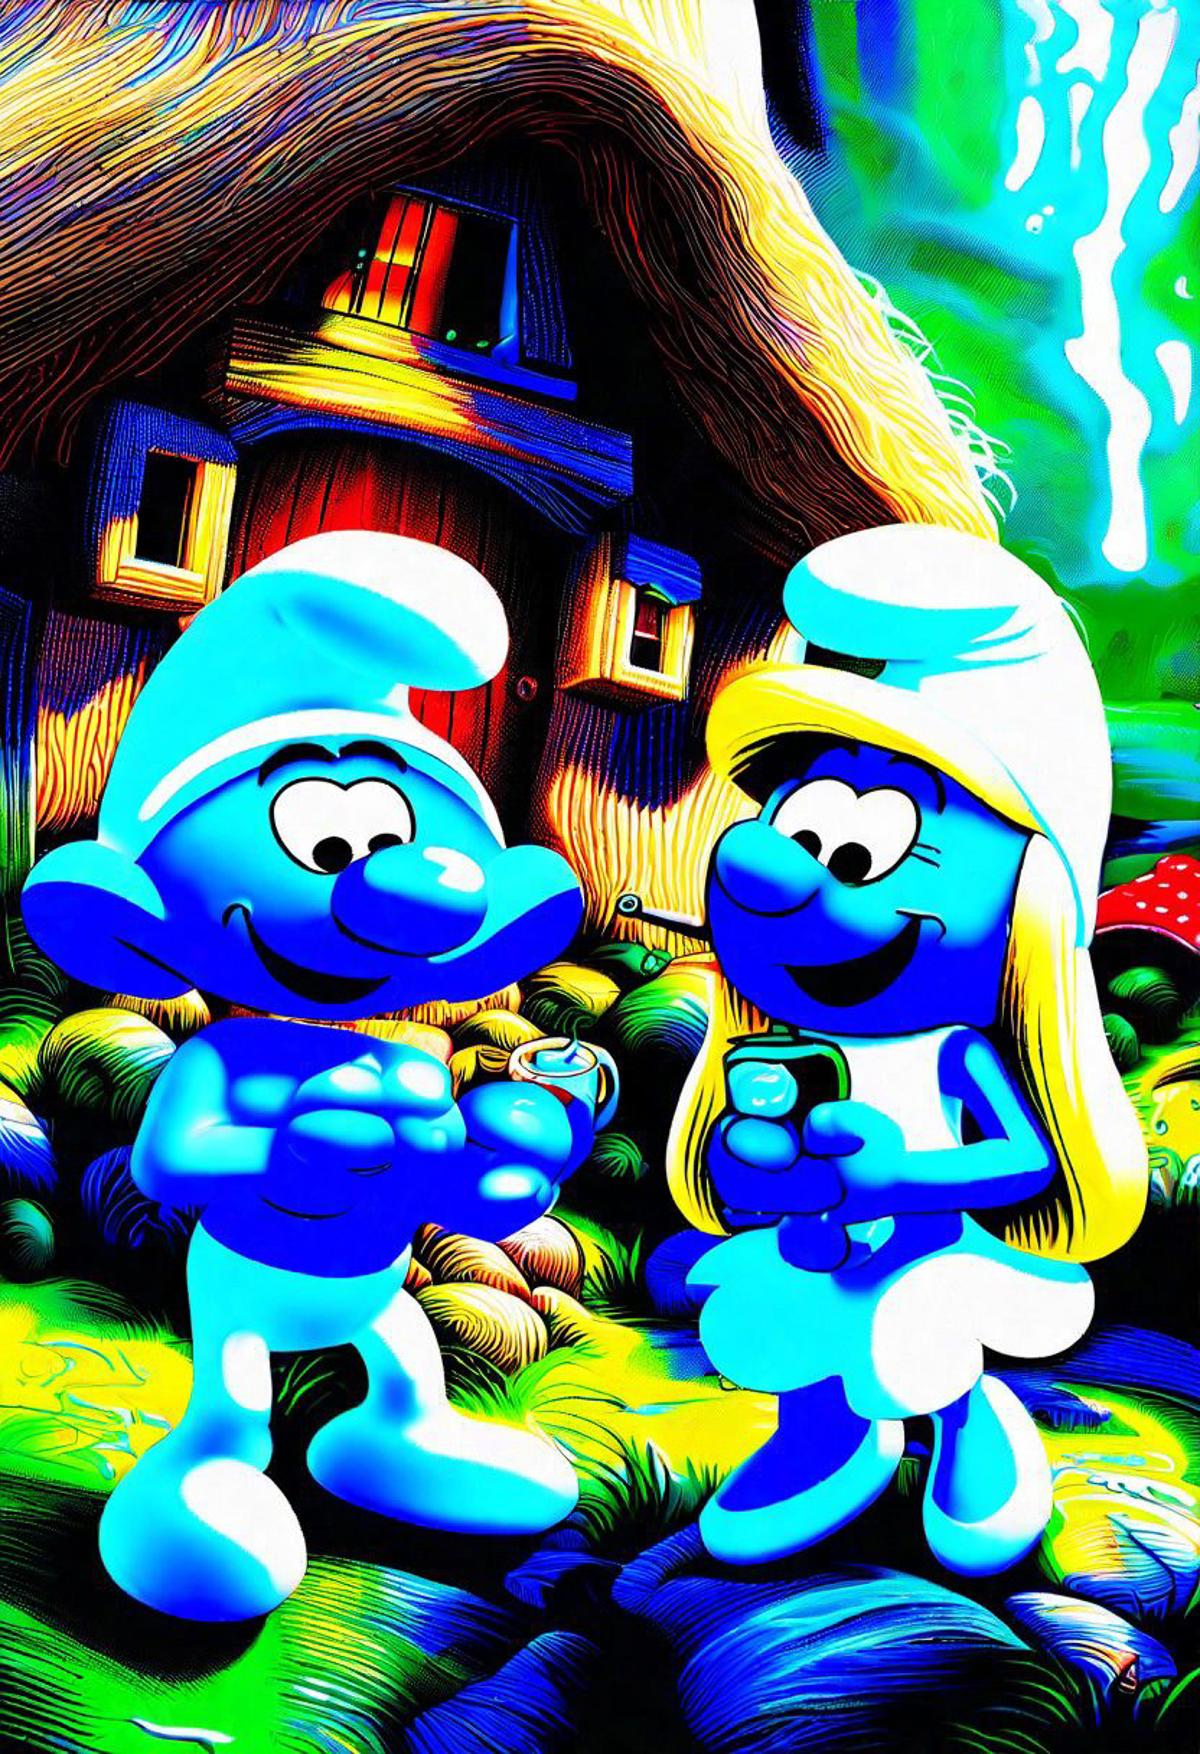 The Smurfs - SDXL image by Pops_T_800_Cyborg